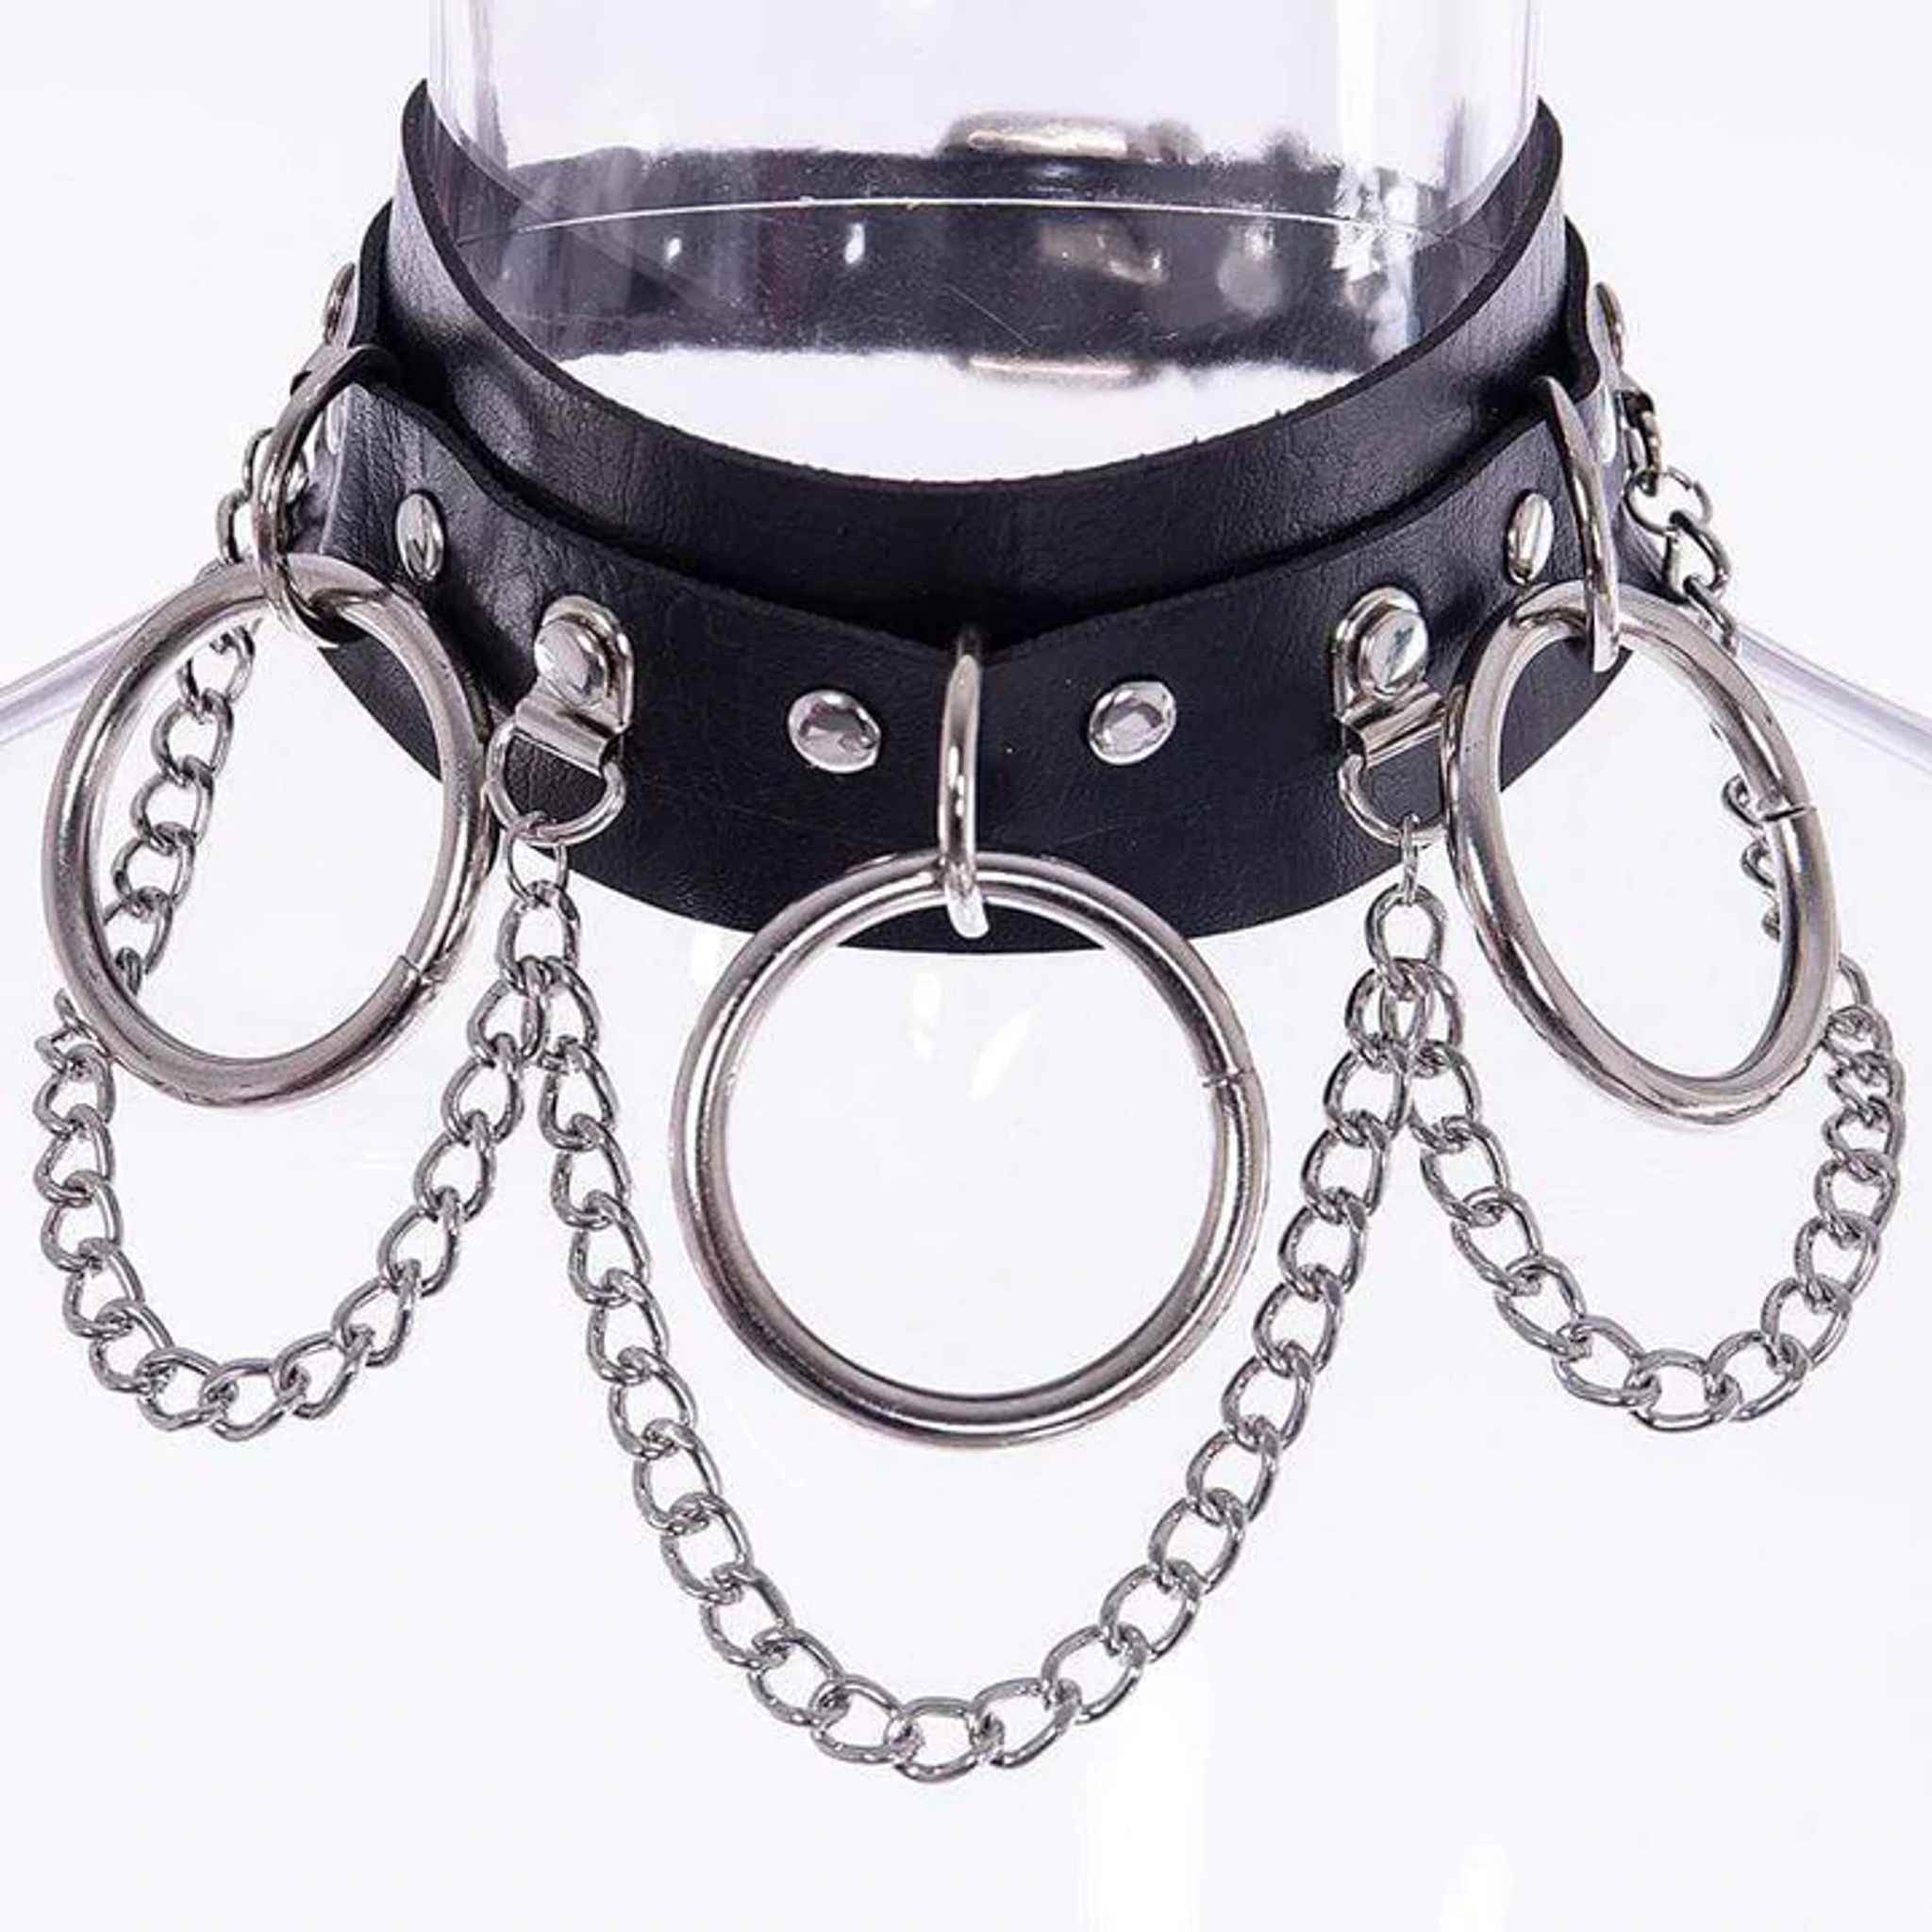 Drezden Goth Gothic Punk Chokers with Chains